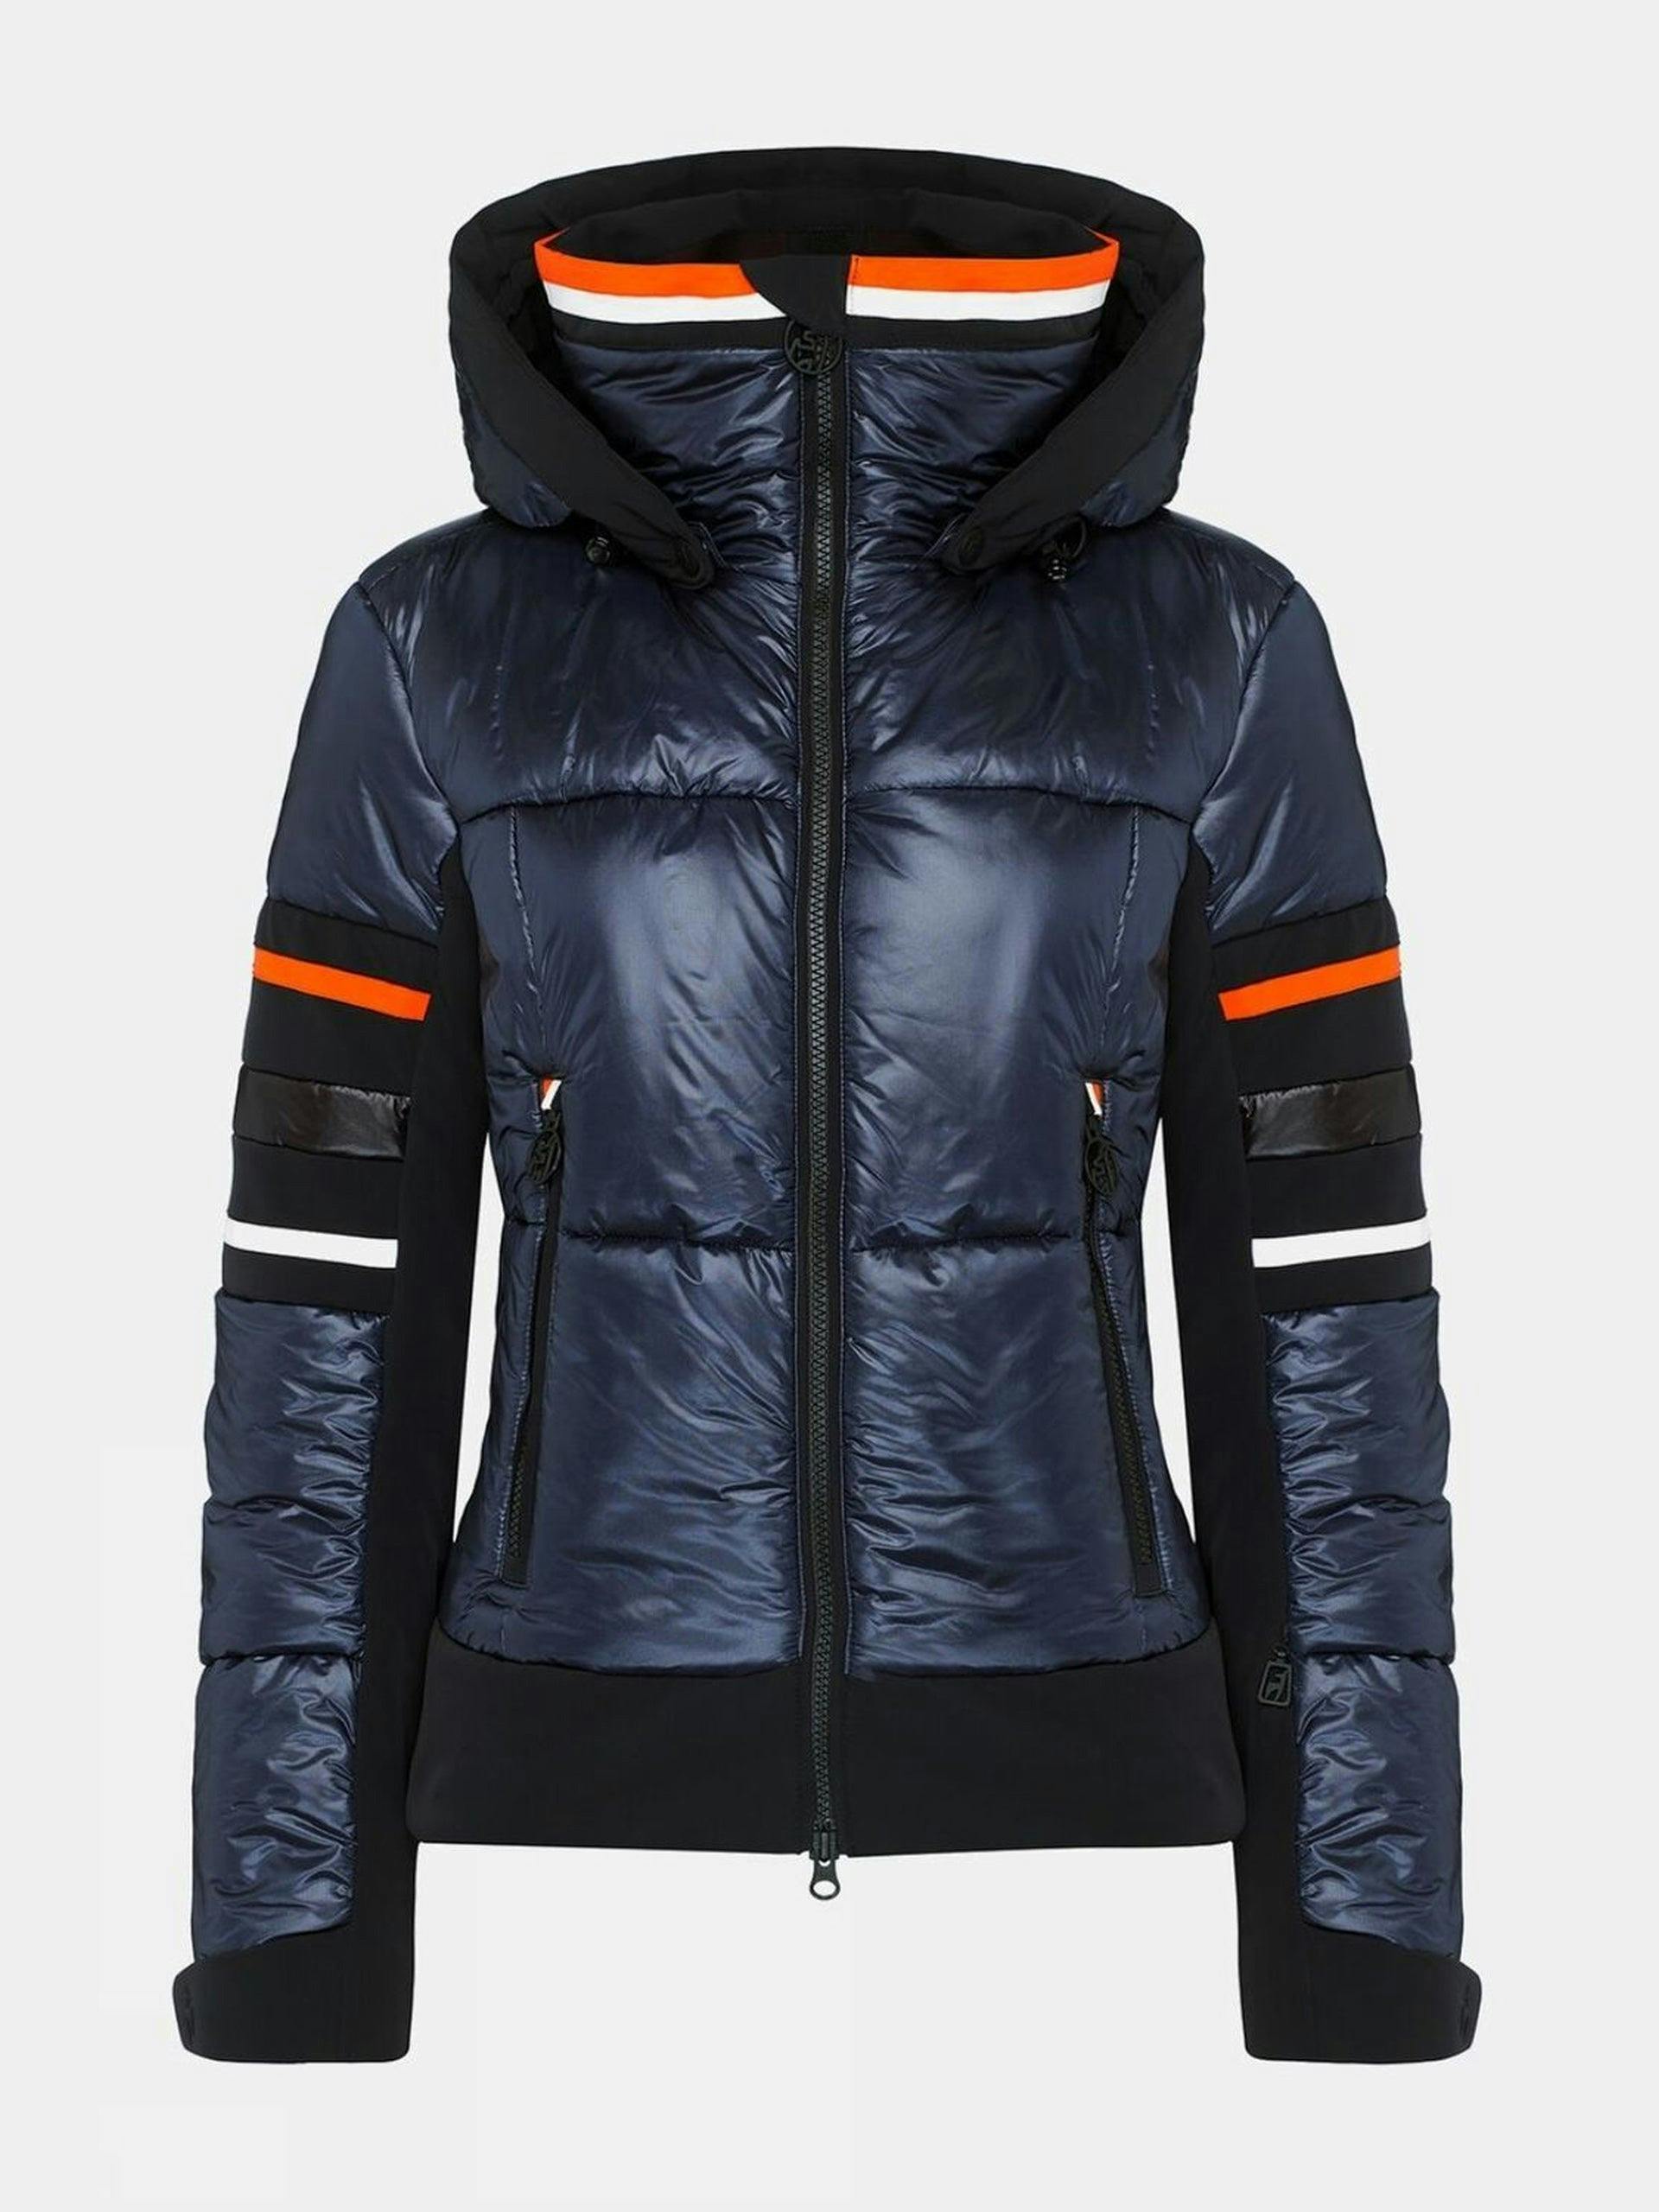 Navy quilted insulated ski jacket with orange and white detailing